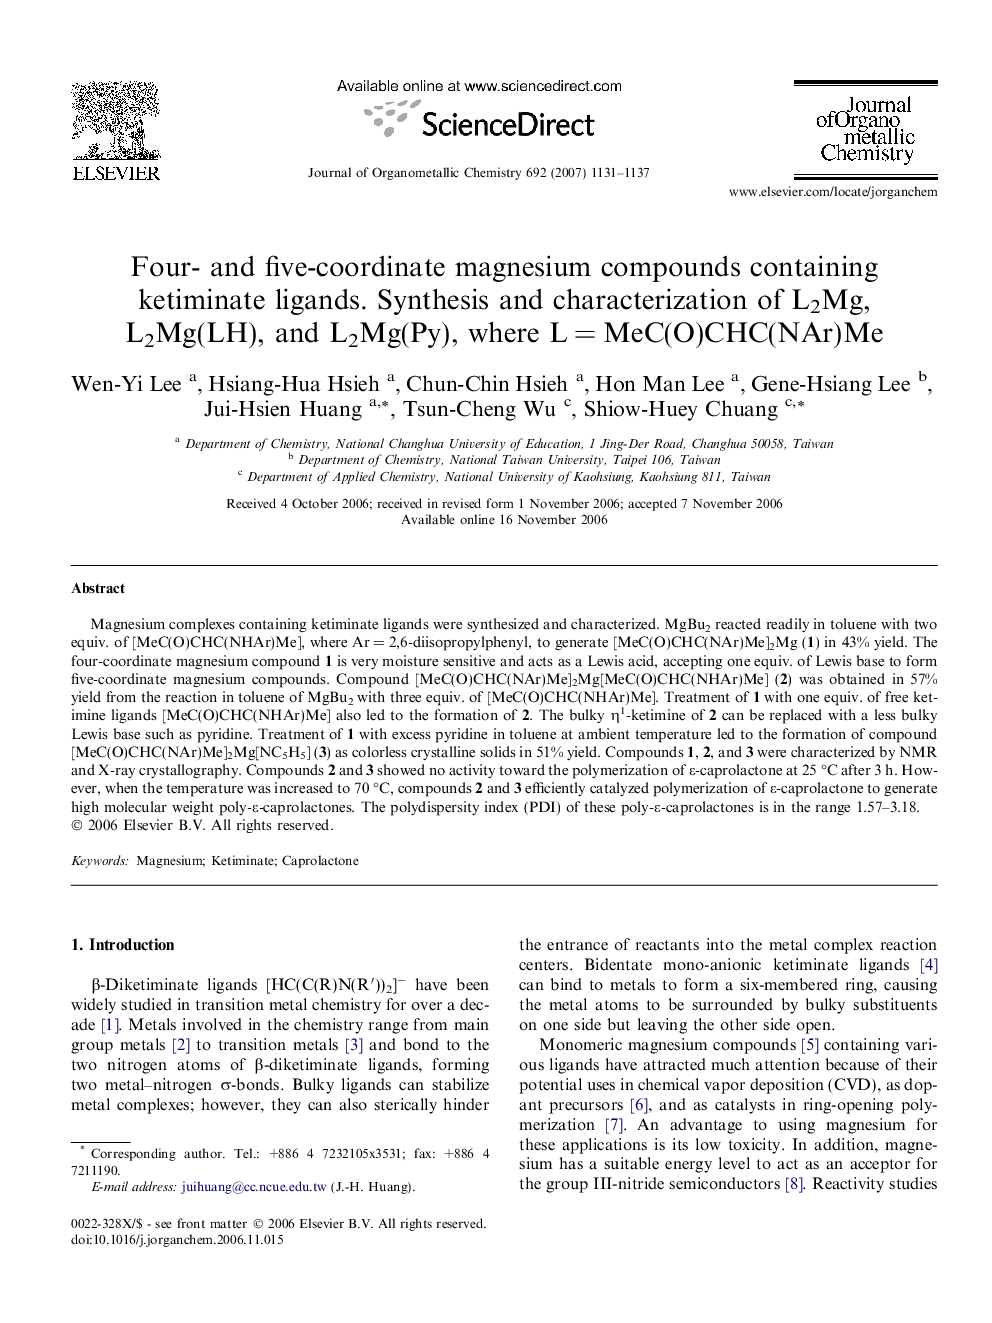 Four- and five-coordinate magnesium compounds containing ketiminate ligands. Synthesis and characterization of L2Mg, L2Mg(LH), and L2Mg(Py), where L = MeC(O)CHC(NAr)Me